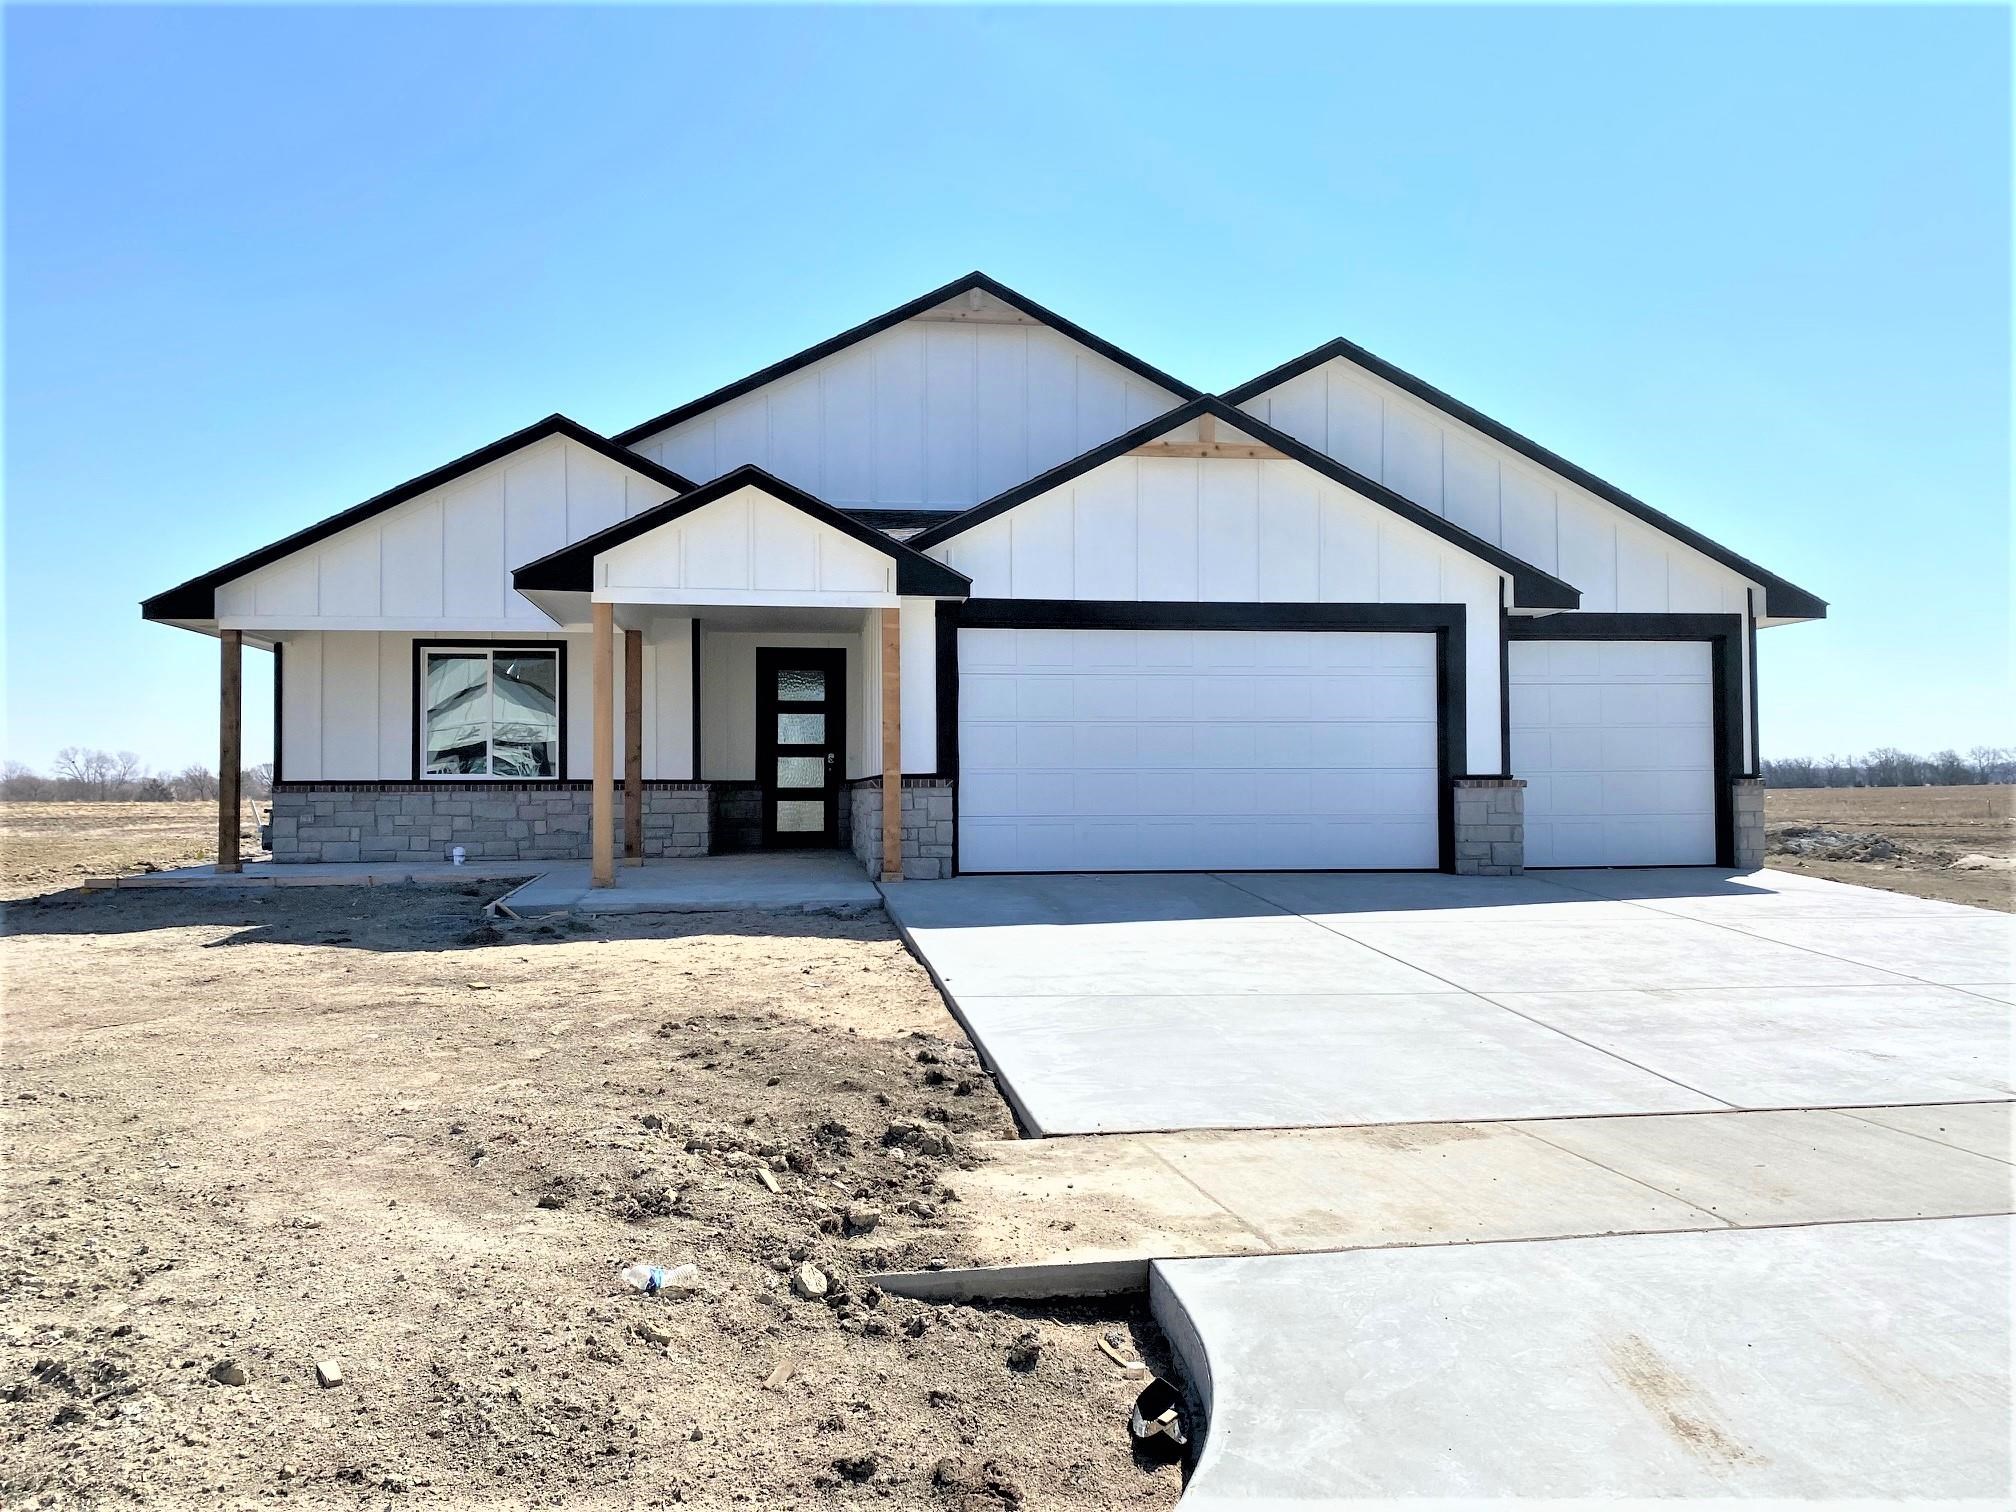 Come see this no step entry home in the beautiful Clear Ridge Development! The home features 3 bedro